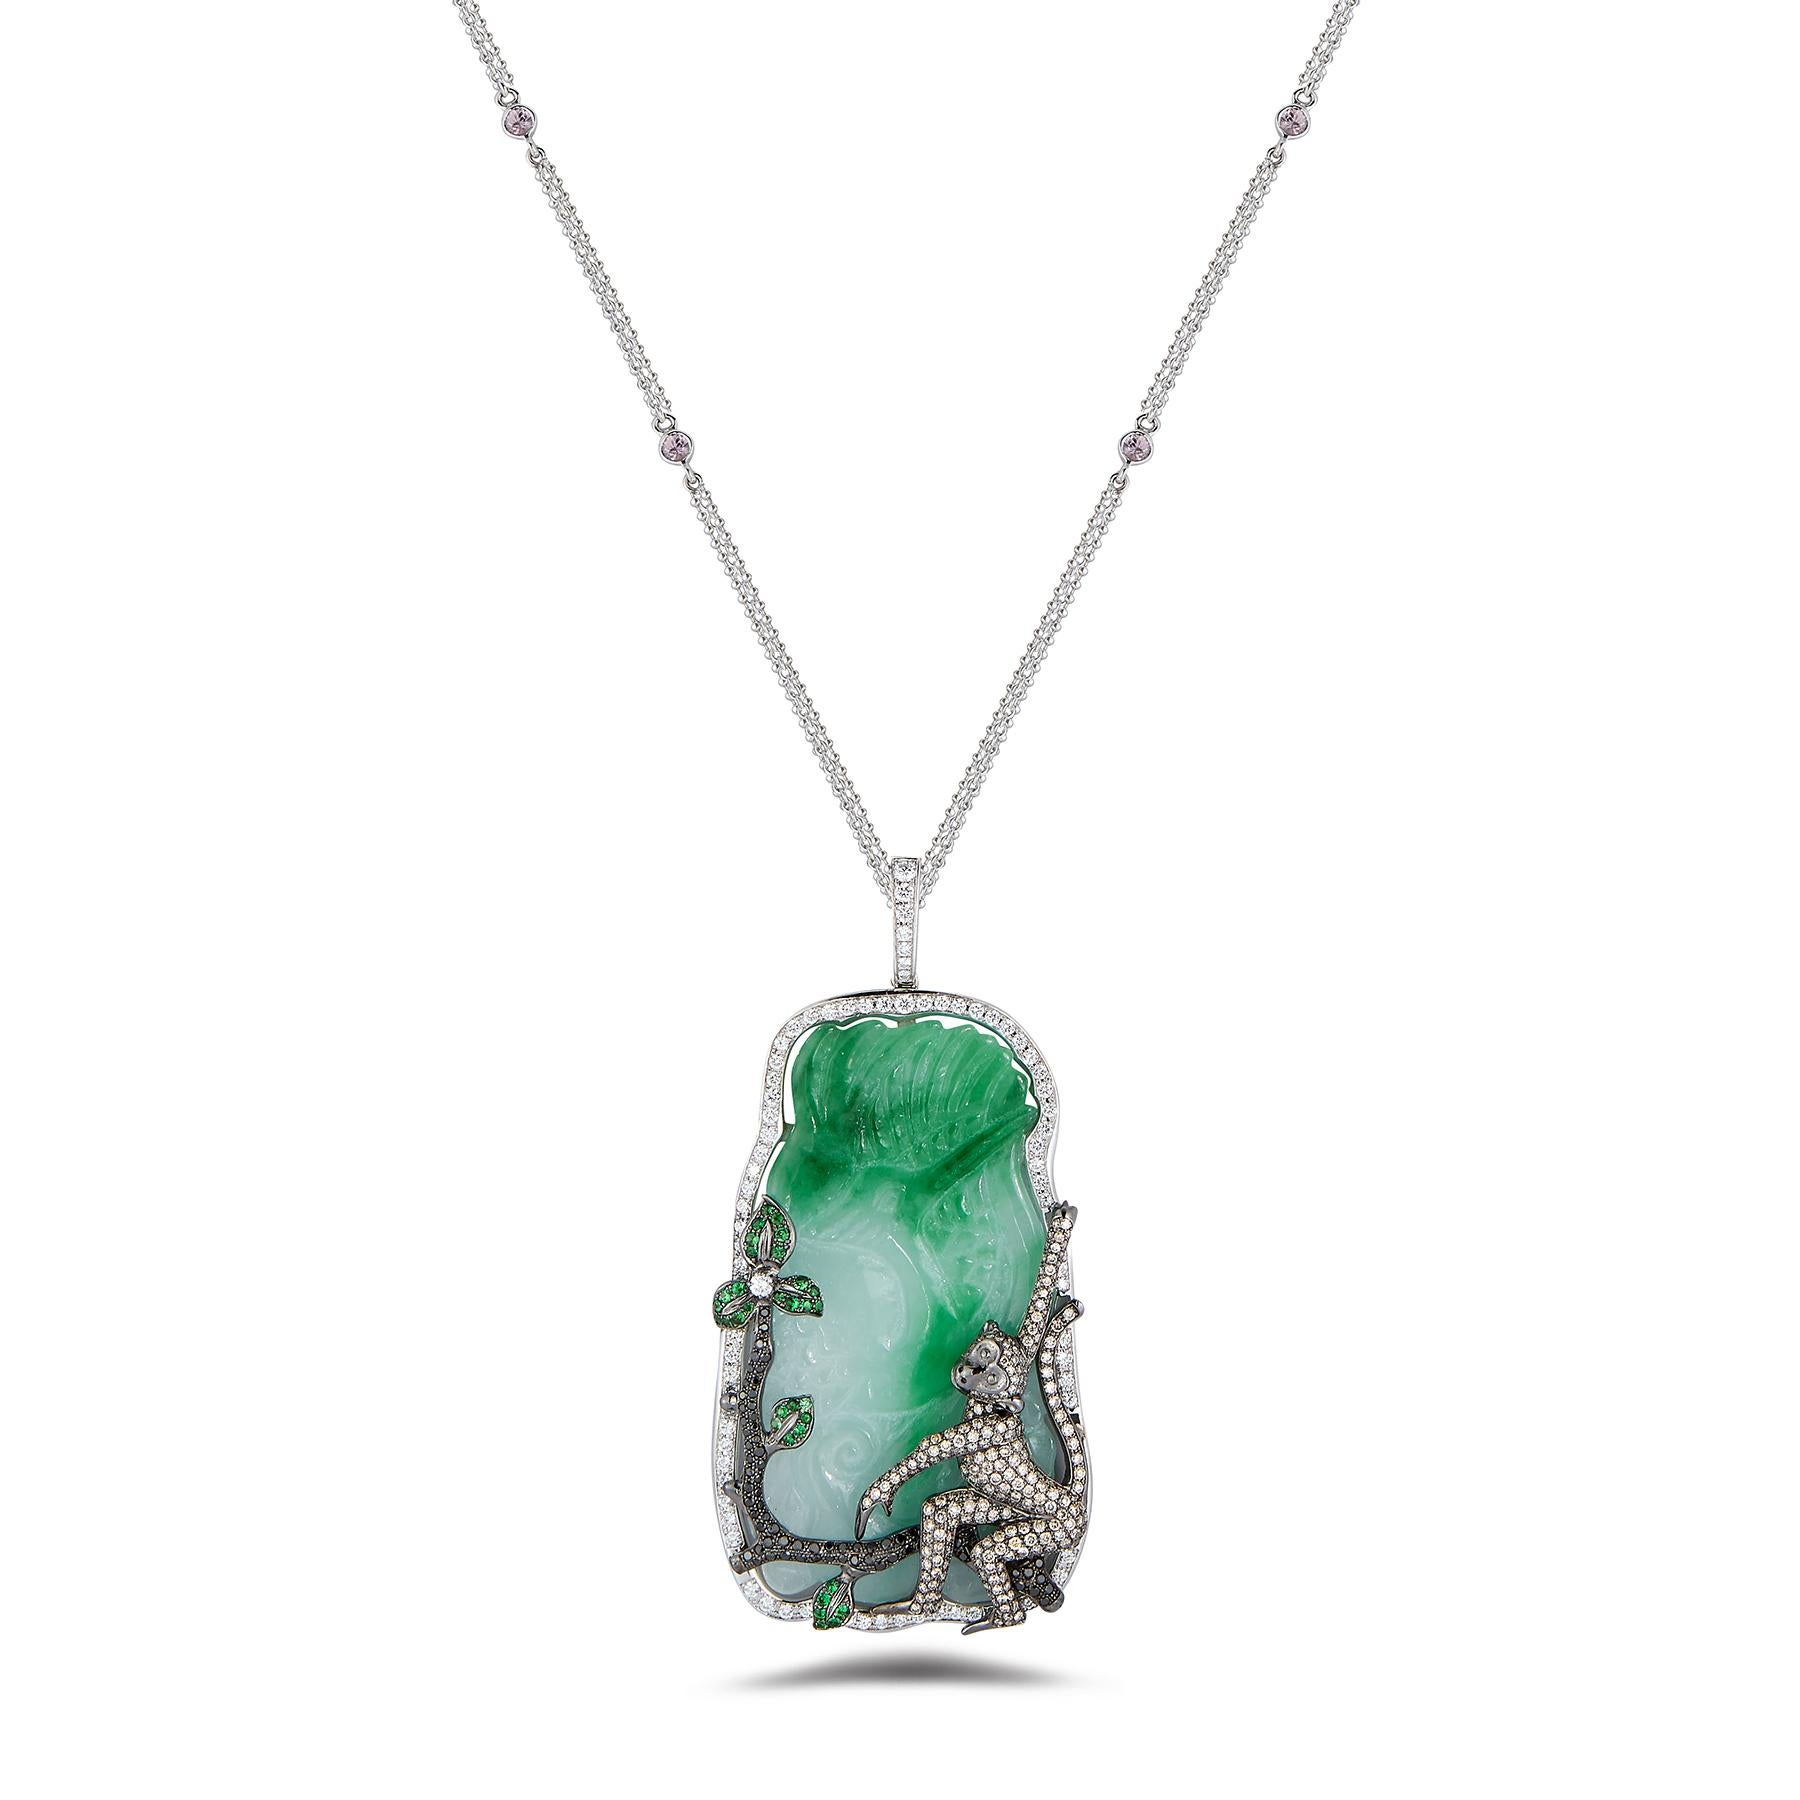 Unique and Lovely 18K White Gold Necklace with Jade Pendant surrounded by Diamonds, embellished with a black-fancy Diamond & Tanzanite branch and Diamond-encrusted Monkey. Necklace and Pendant covered in over 185 Diamonds and Gems. 